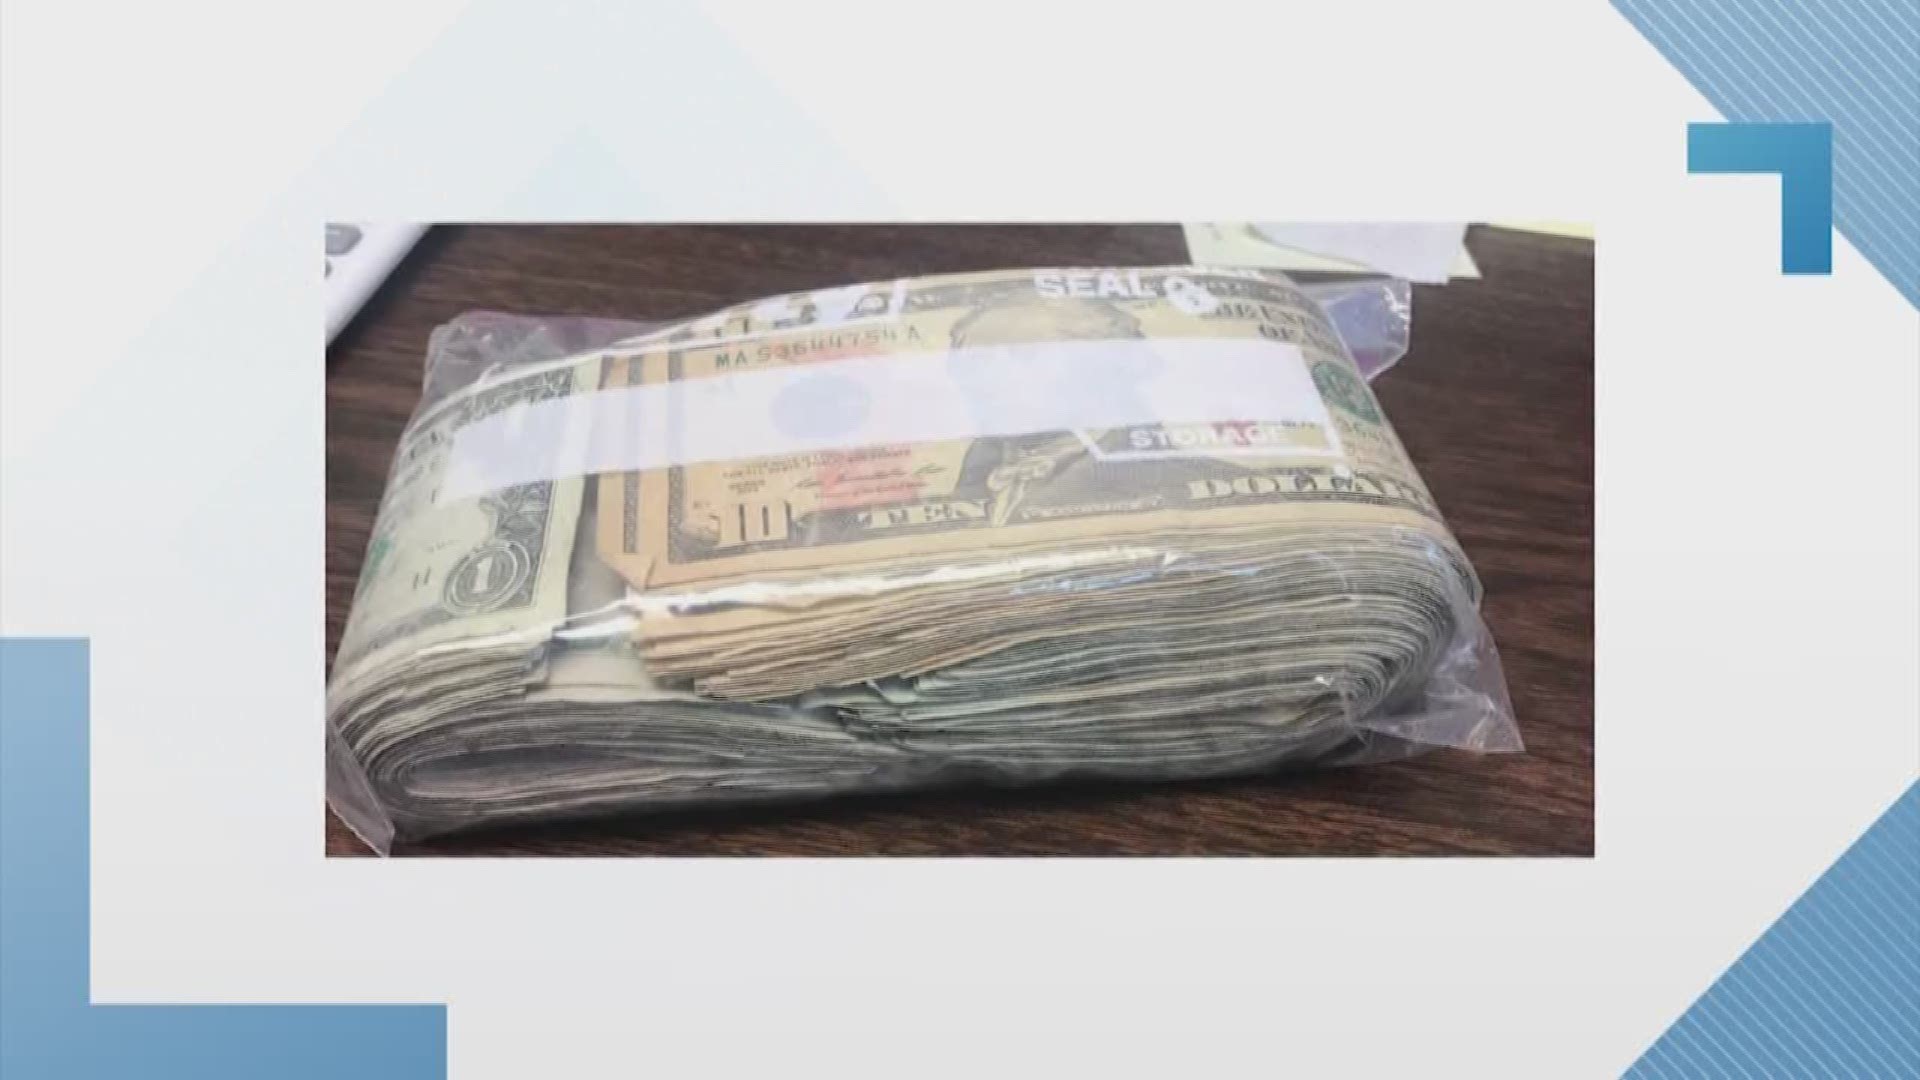 Two Texas Department of Transportation workers found $2,000 on the side of the highway and turned it in.